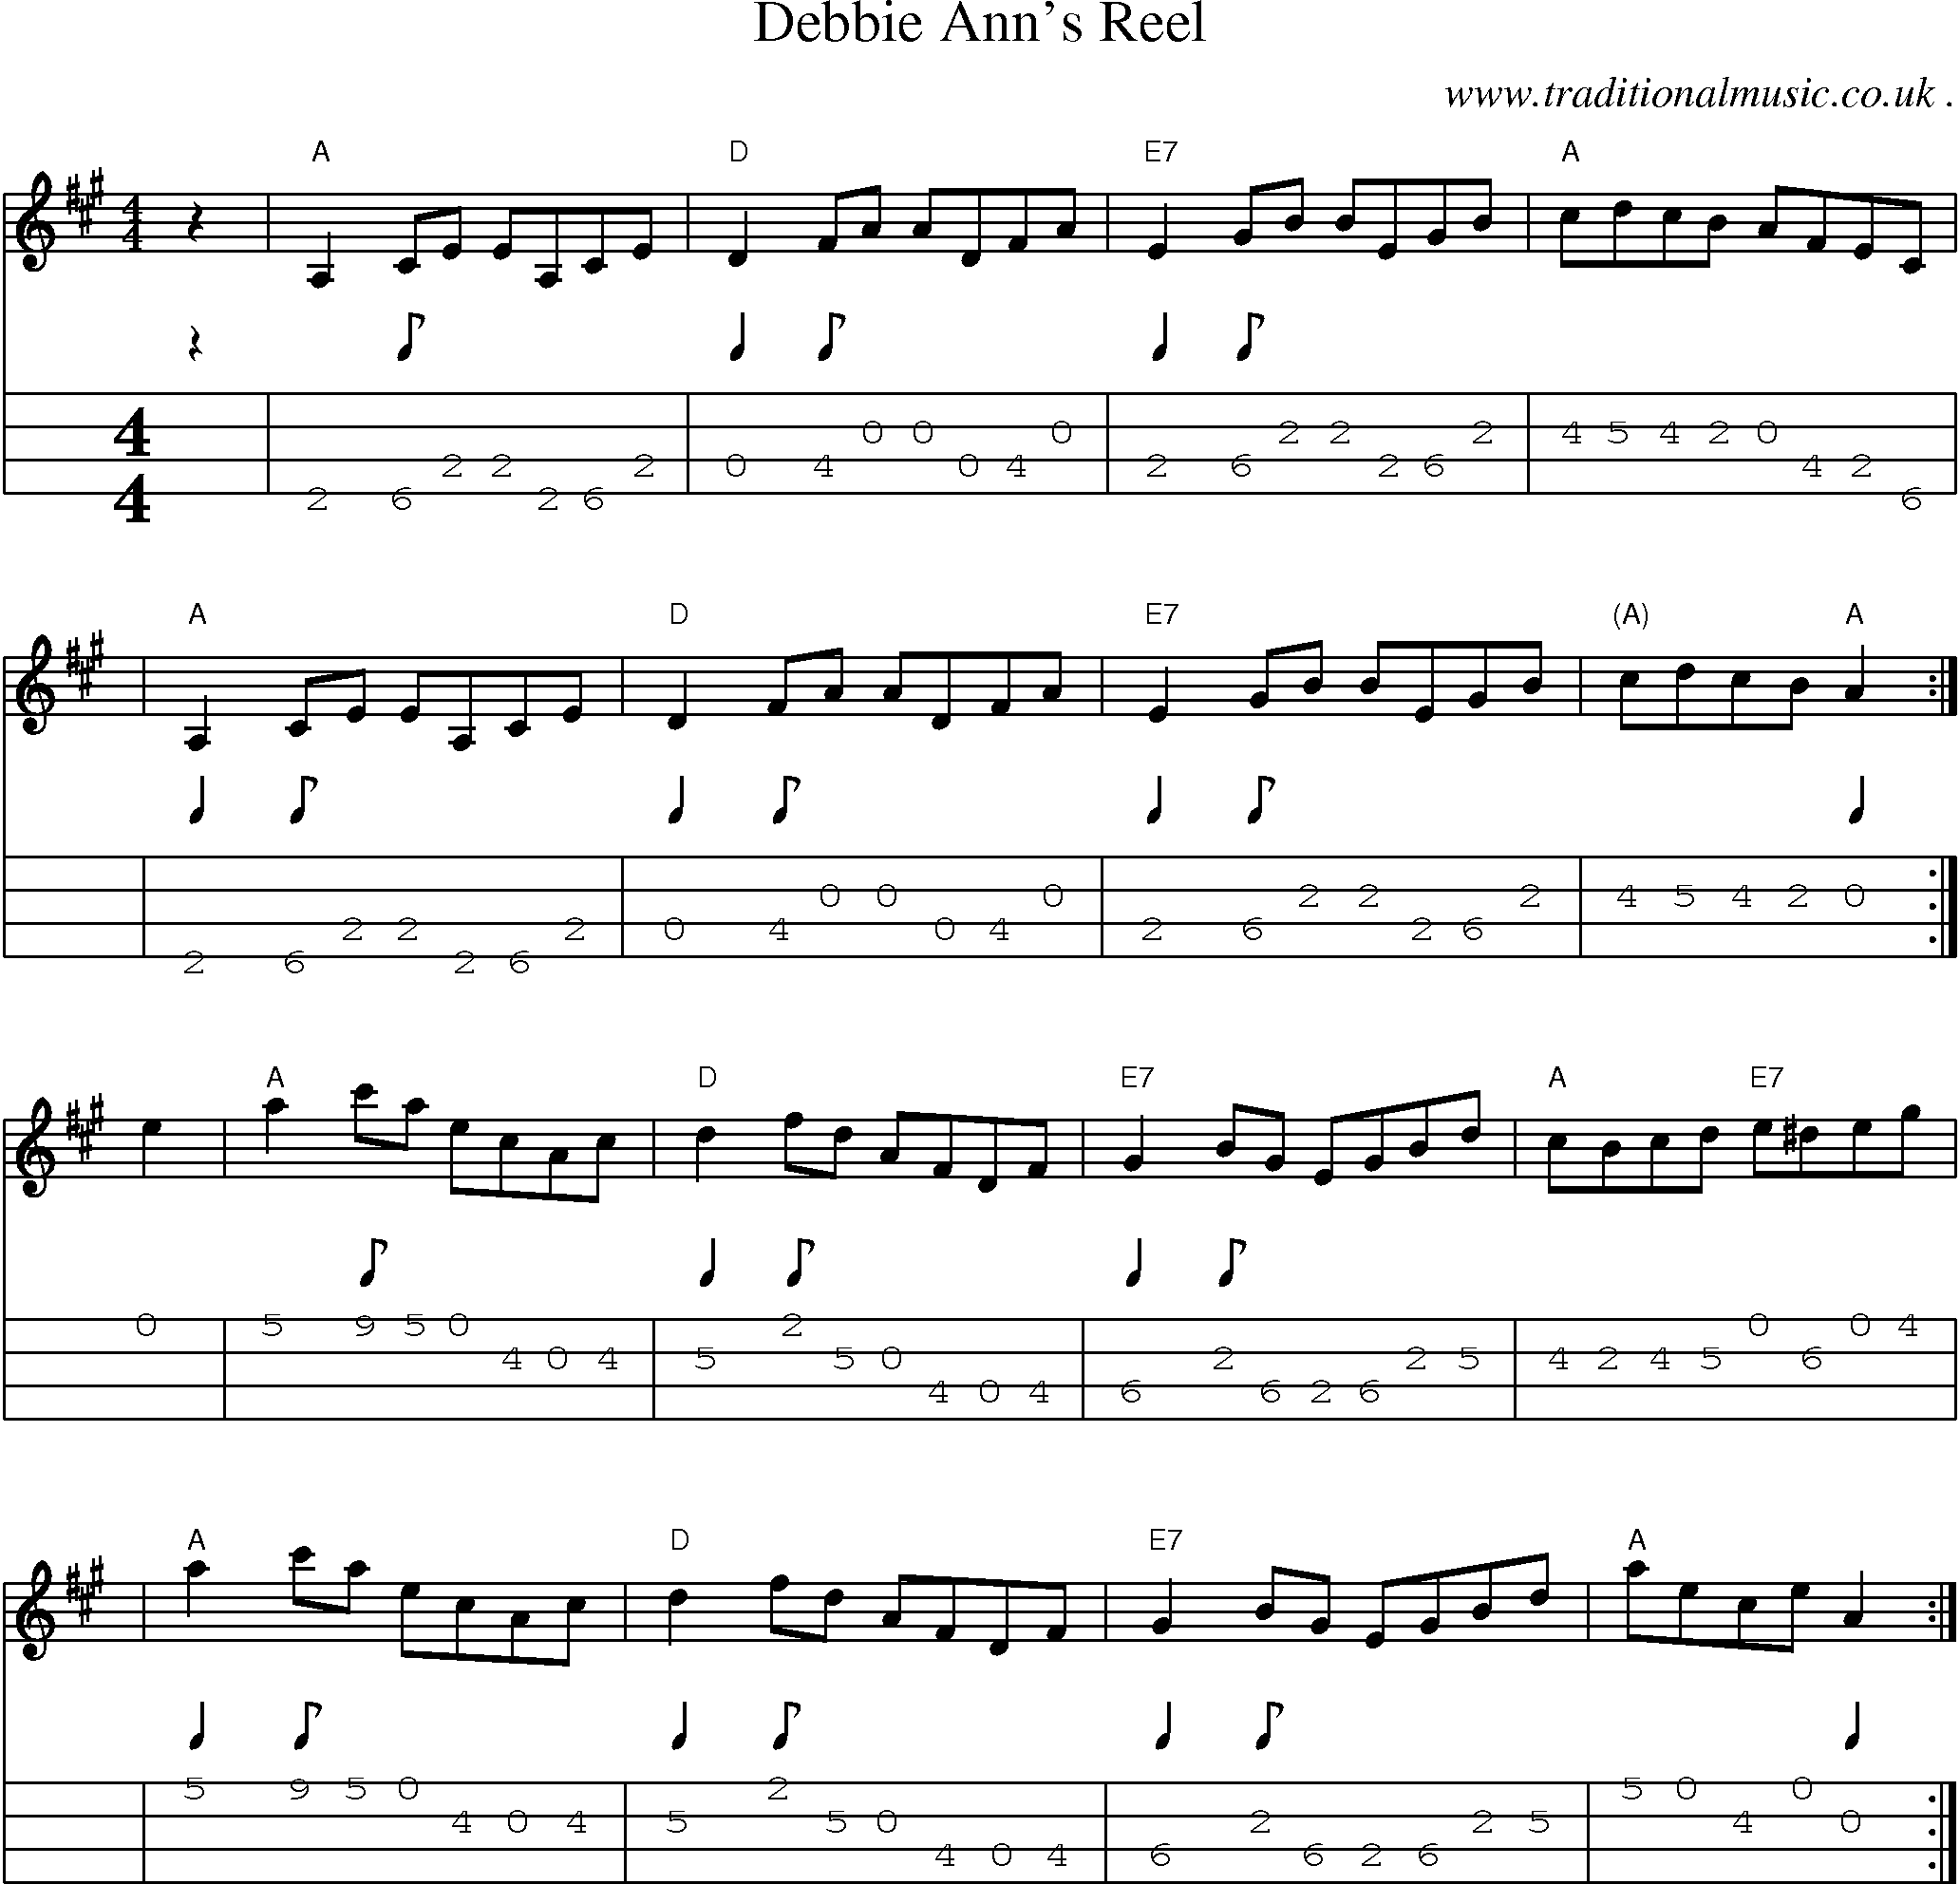 Sheet-music  score, Chords and Mandolin Tabs for Debbie Anns Reel